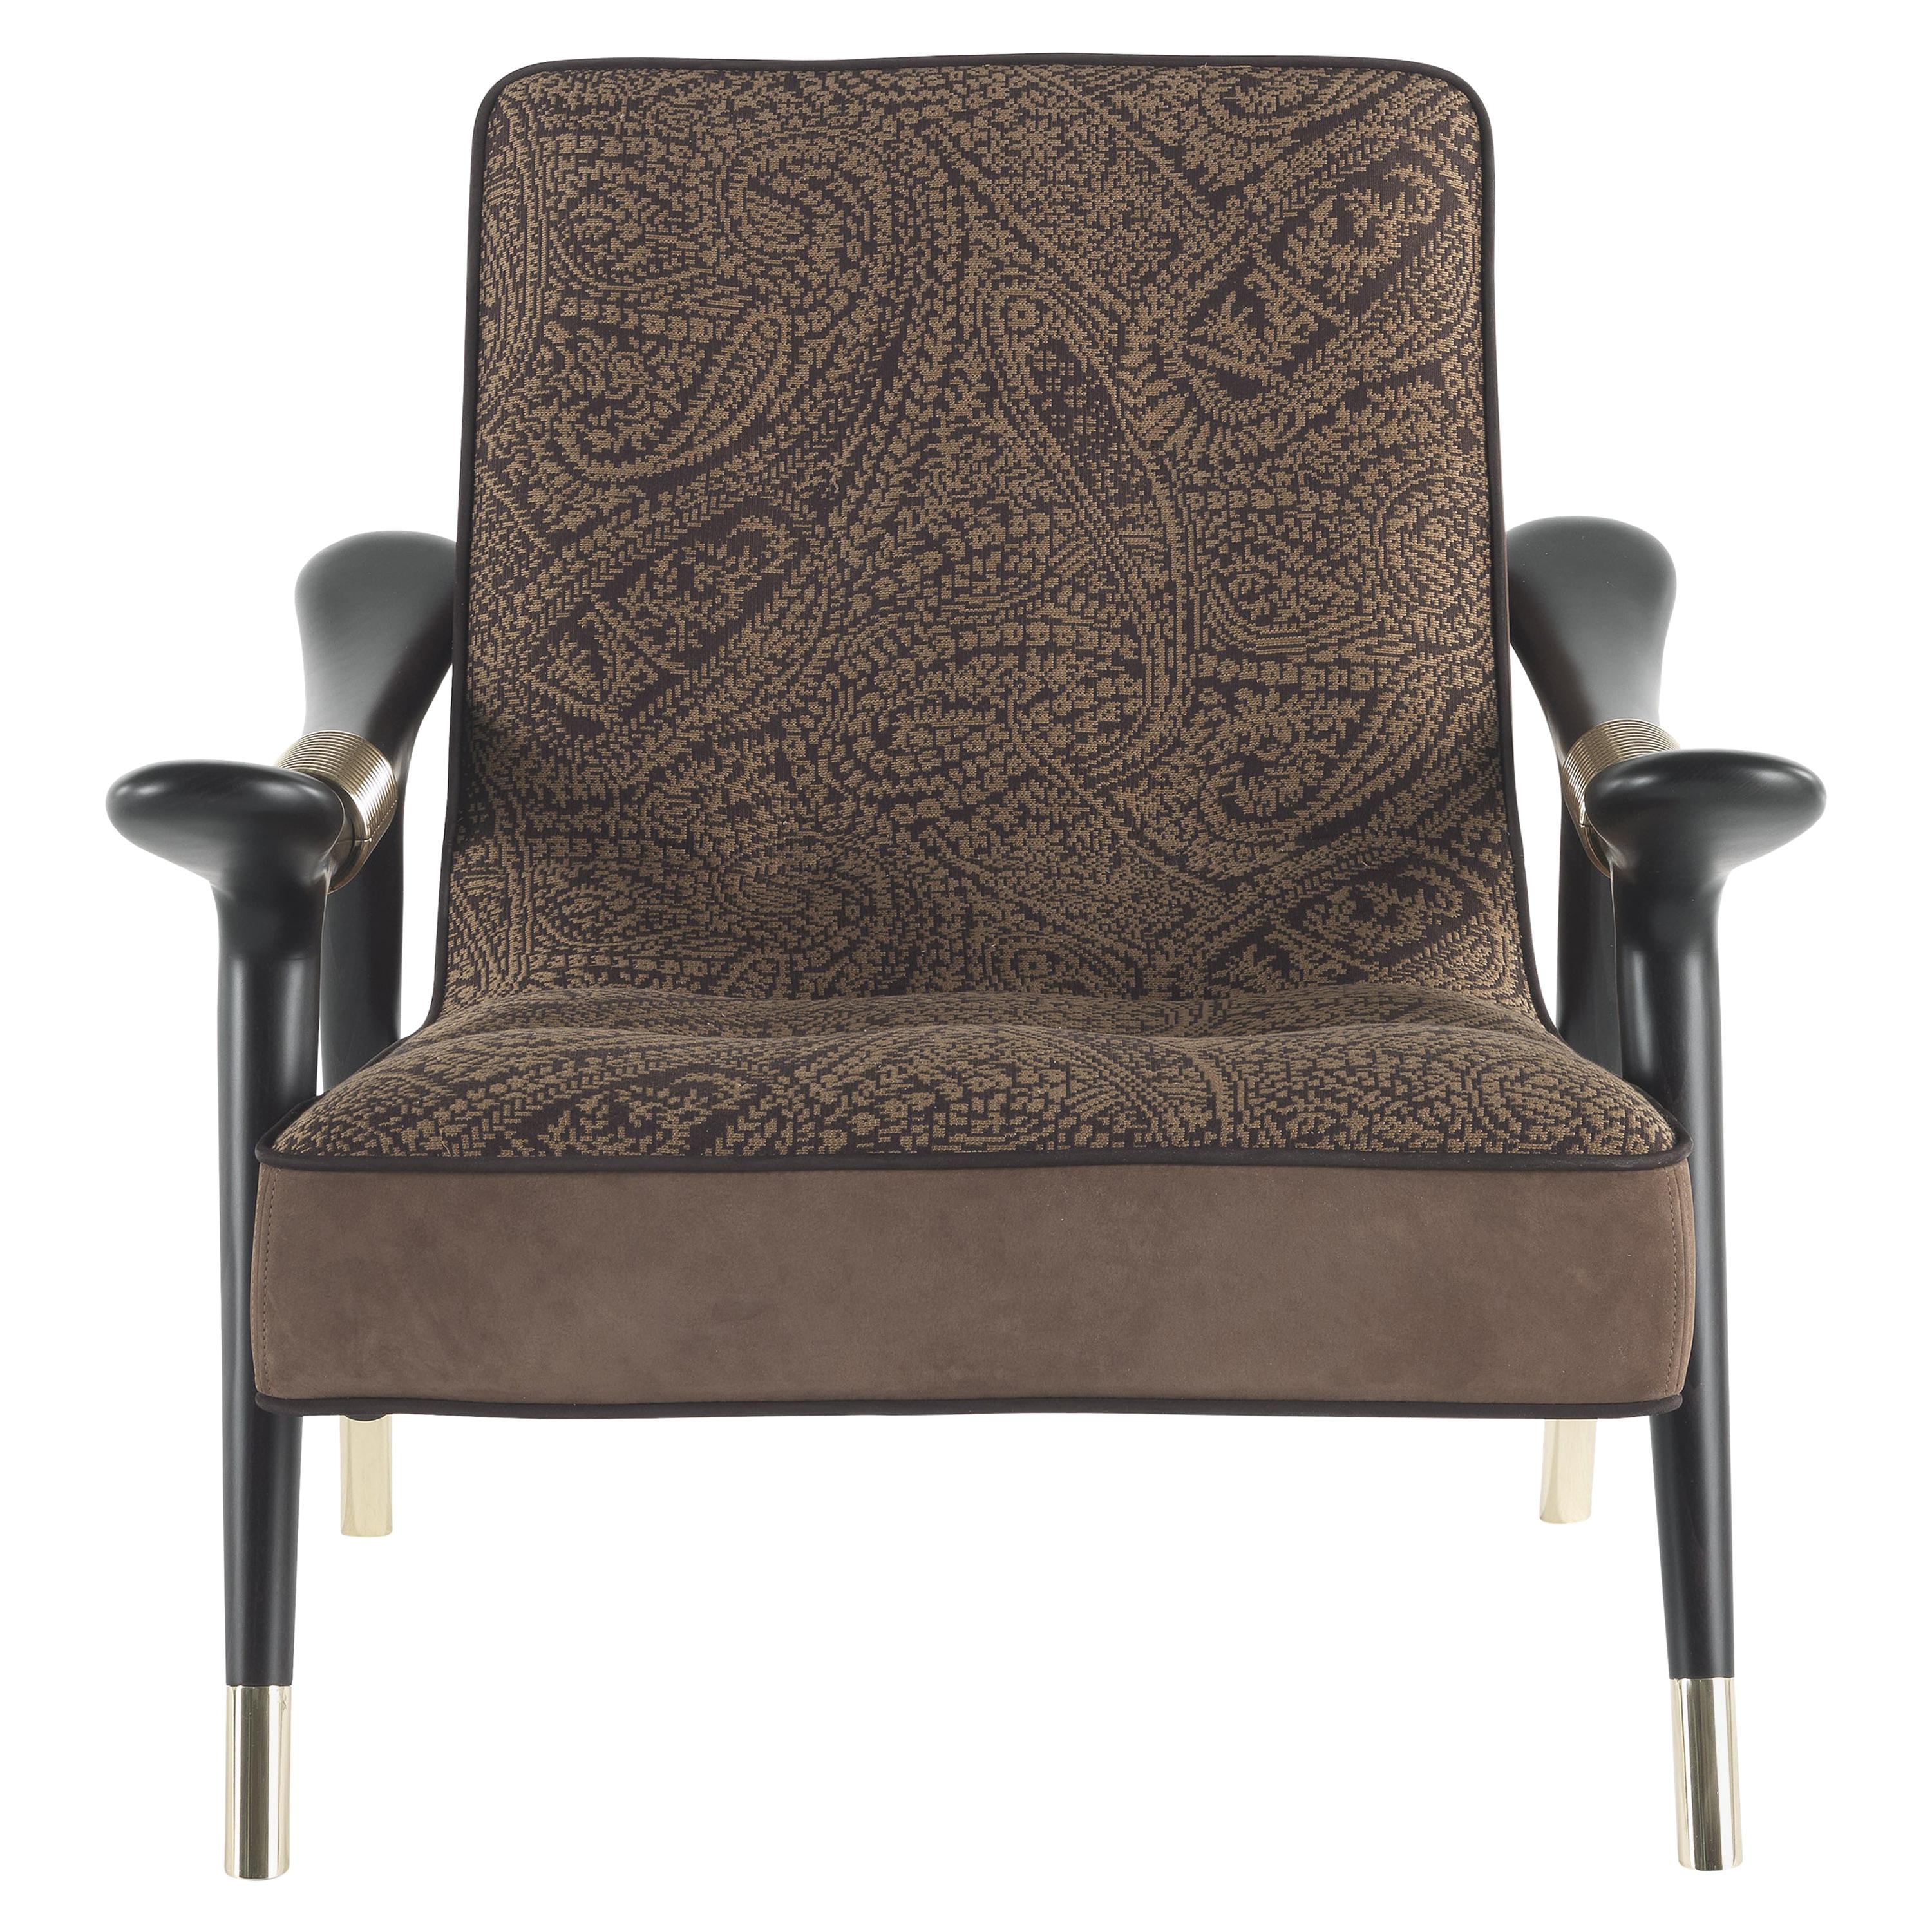 21st Century Masai Armchair in Zulu Fabric by Etro Home Interiors For Sale